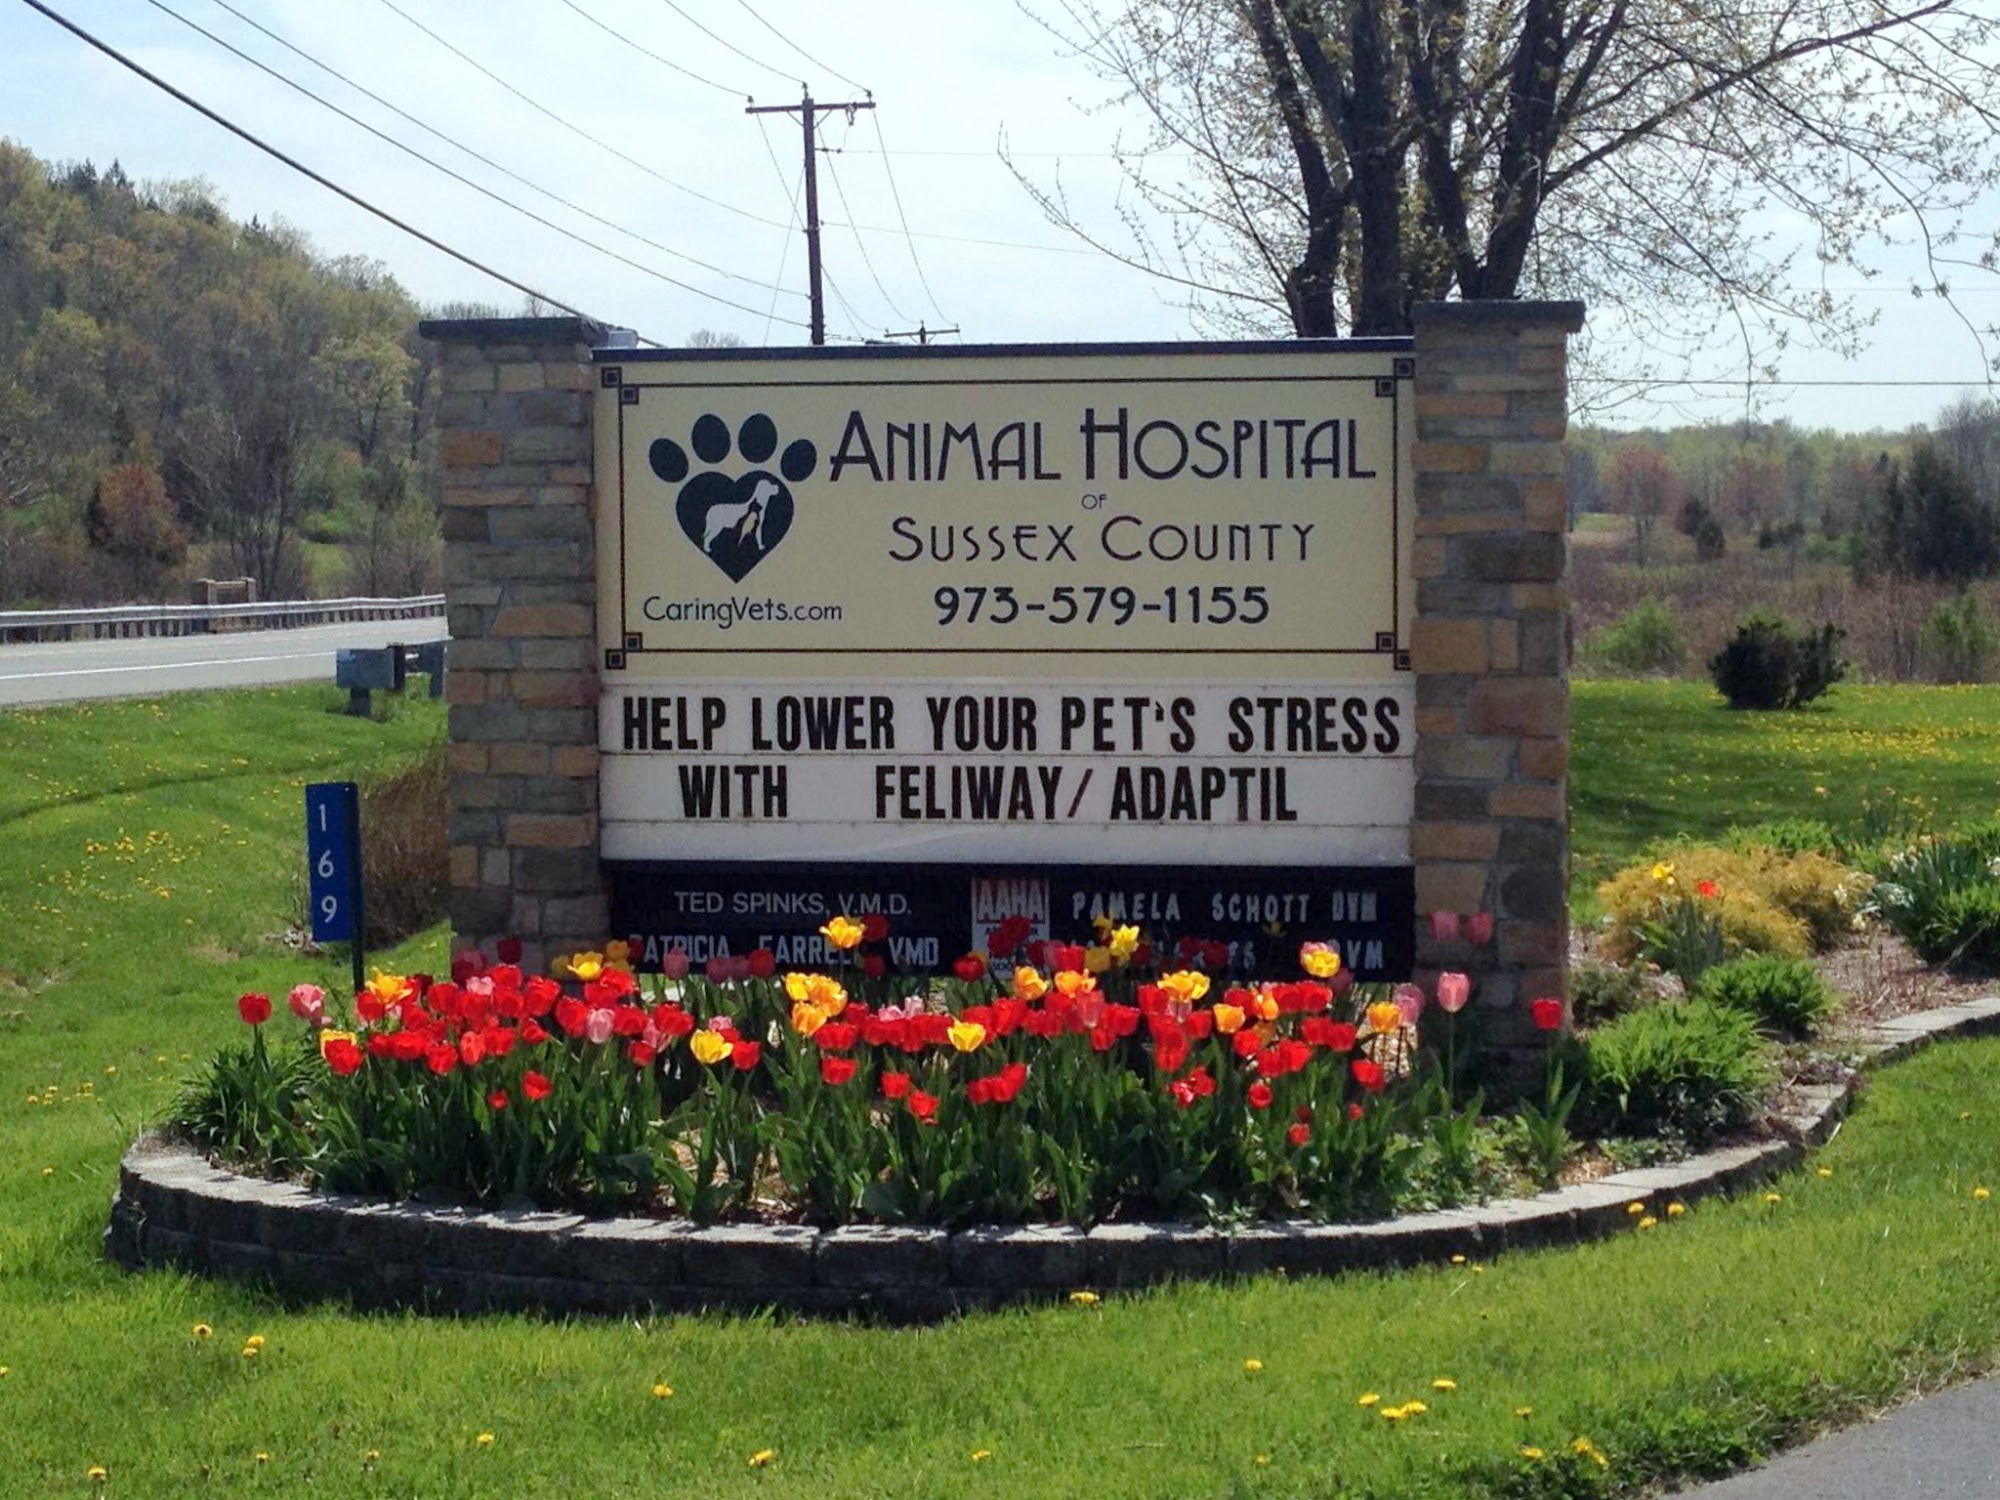 Animal Hospital of Sussex County